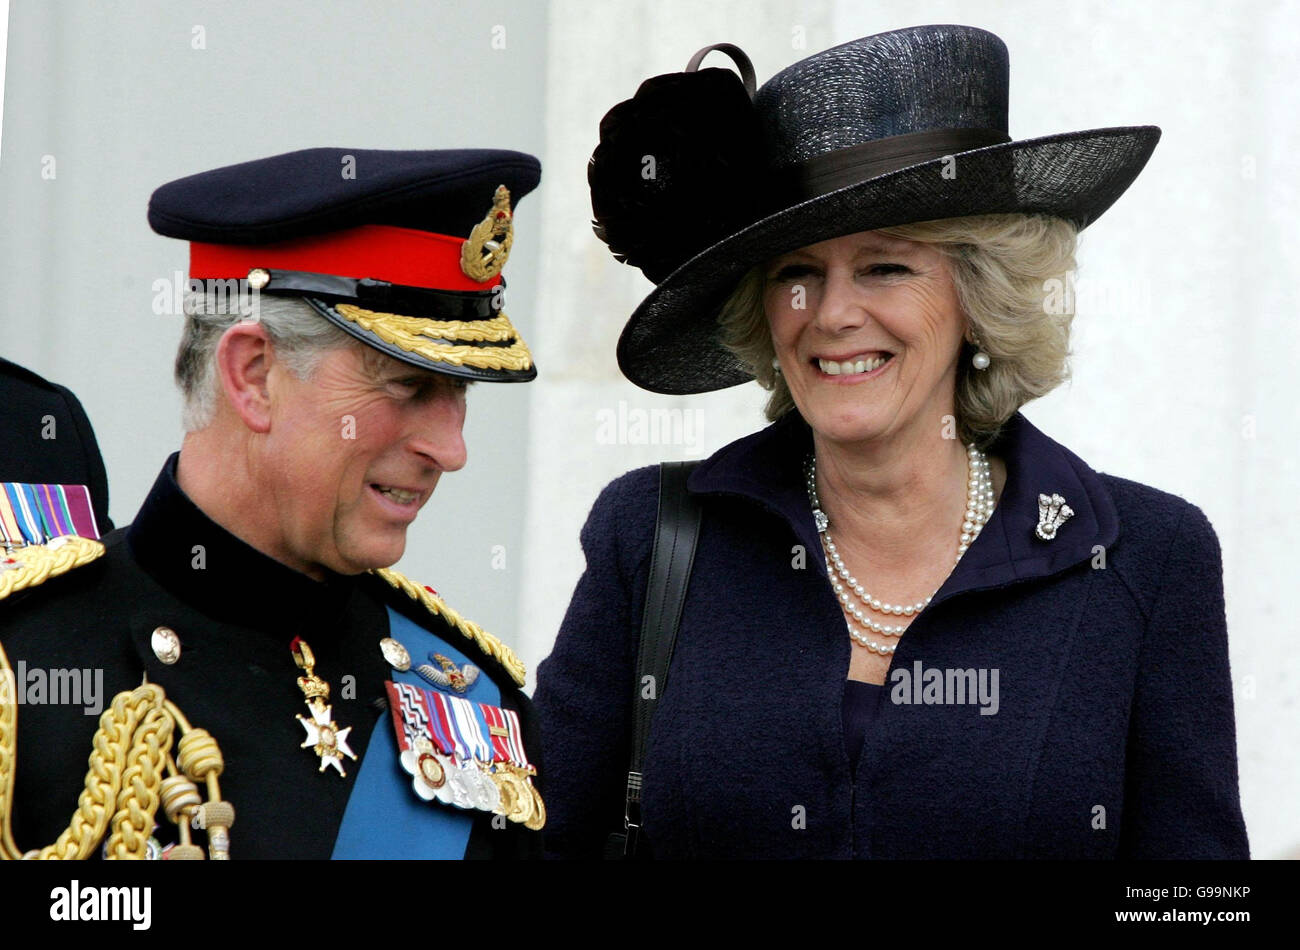 The Prince of Wales and the Duchess of Cornwall at Sandhurst Royal Military Academy after The Sovereign's Parade that marked the completion of Prince Harry's Officer training. PRESS ASSOCIATION Photo Picture date: Wednesday April 12, 2006. The Prince was one of 220 cadets passing out and receiving their commissions into the British Army. See PA story ROYAL Harry. Photo credit should read: Tim Ockenden / PA. Stock Photo